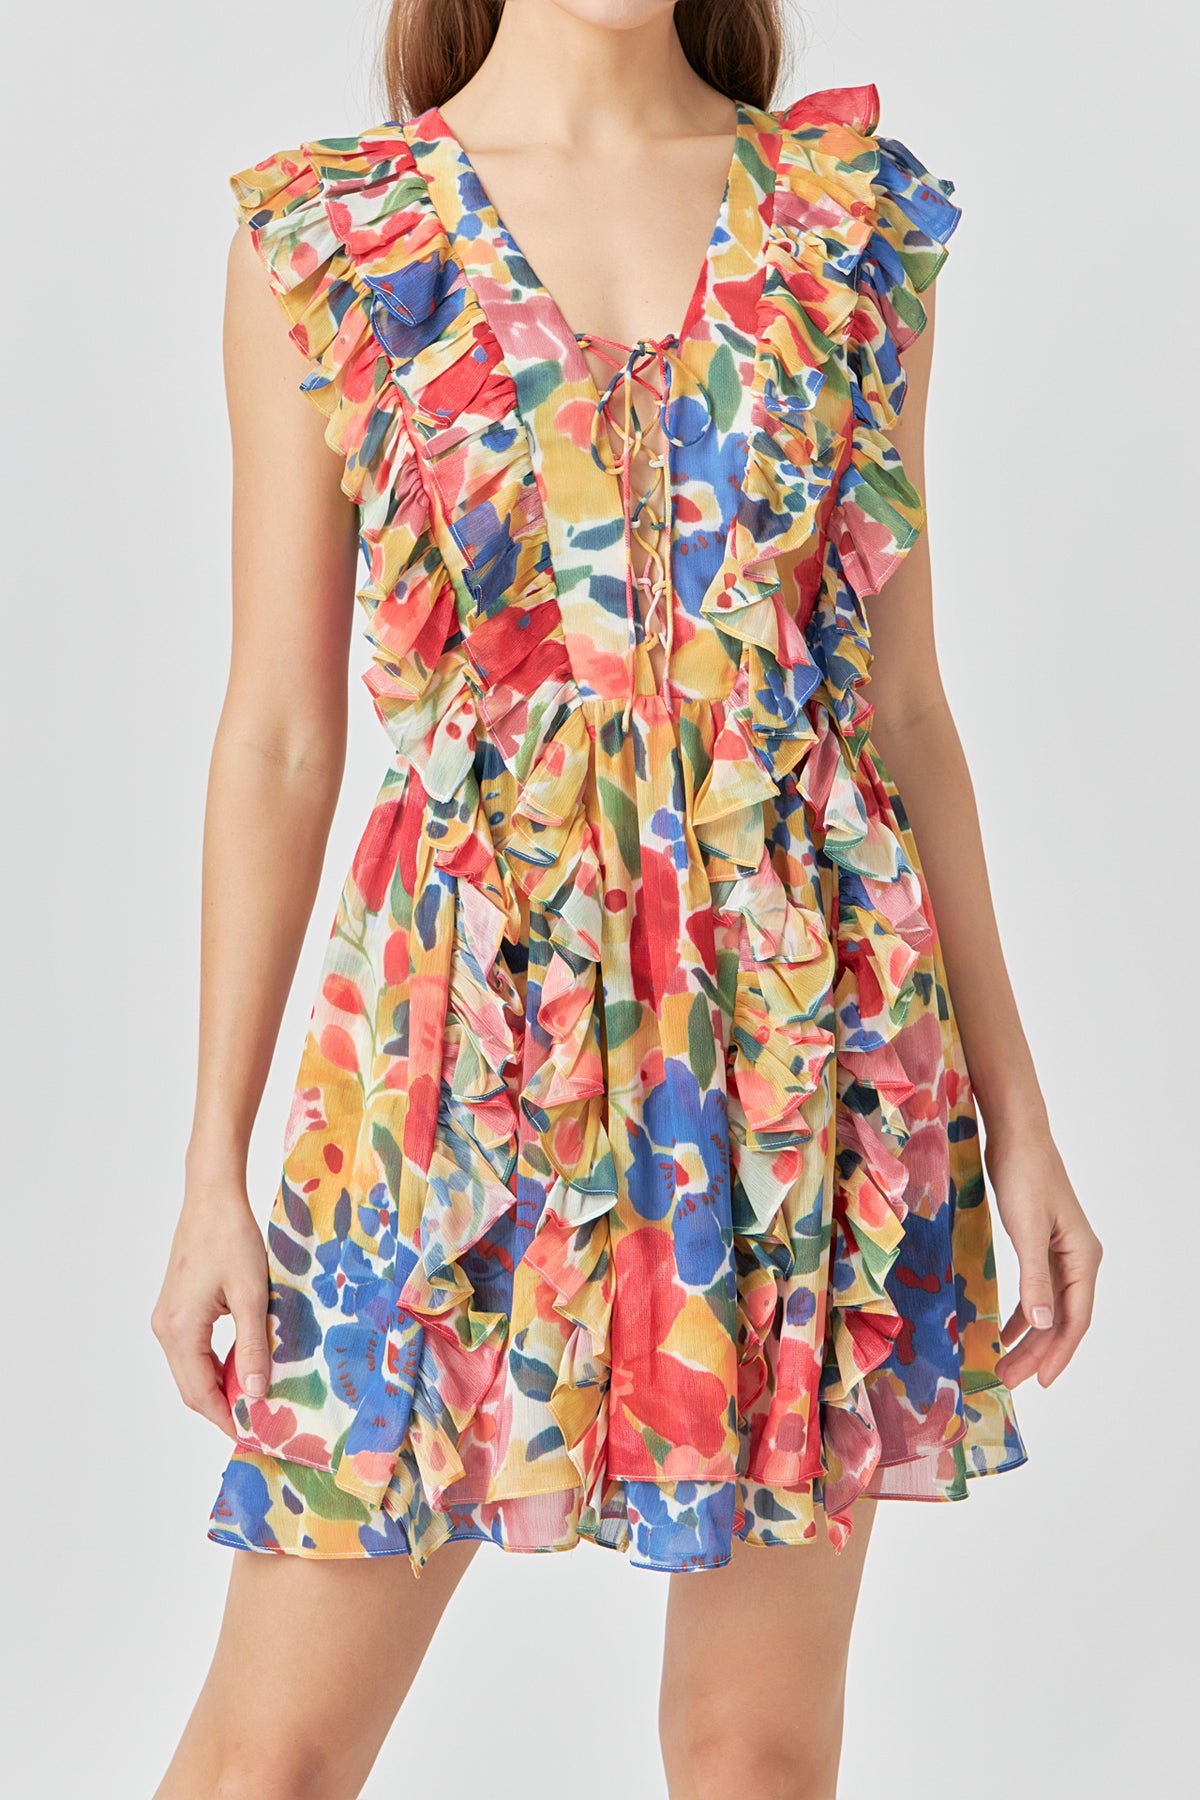 ENDLESS ROSE - Multi Pop Floral Chiffon Ruffled Mini - DRESSES available at Objectrare